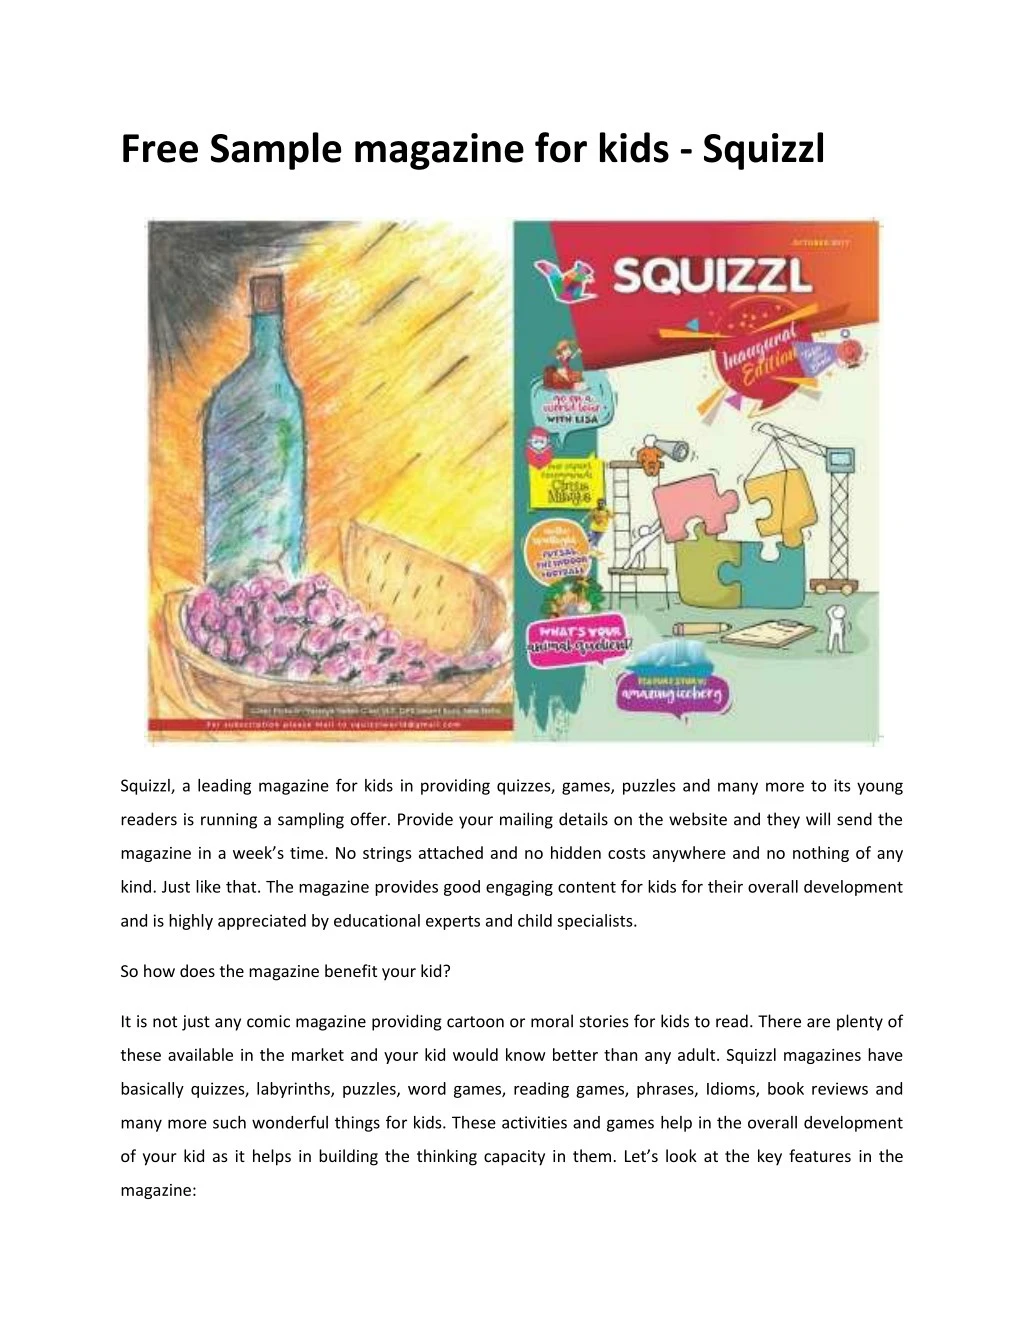 free sample magazine for kids squizzl